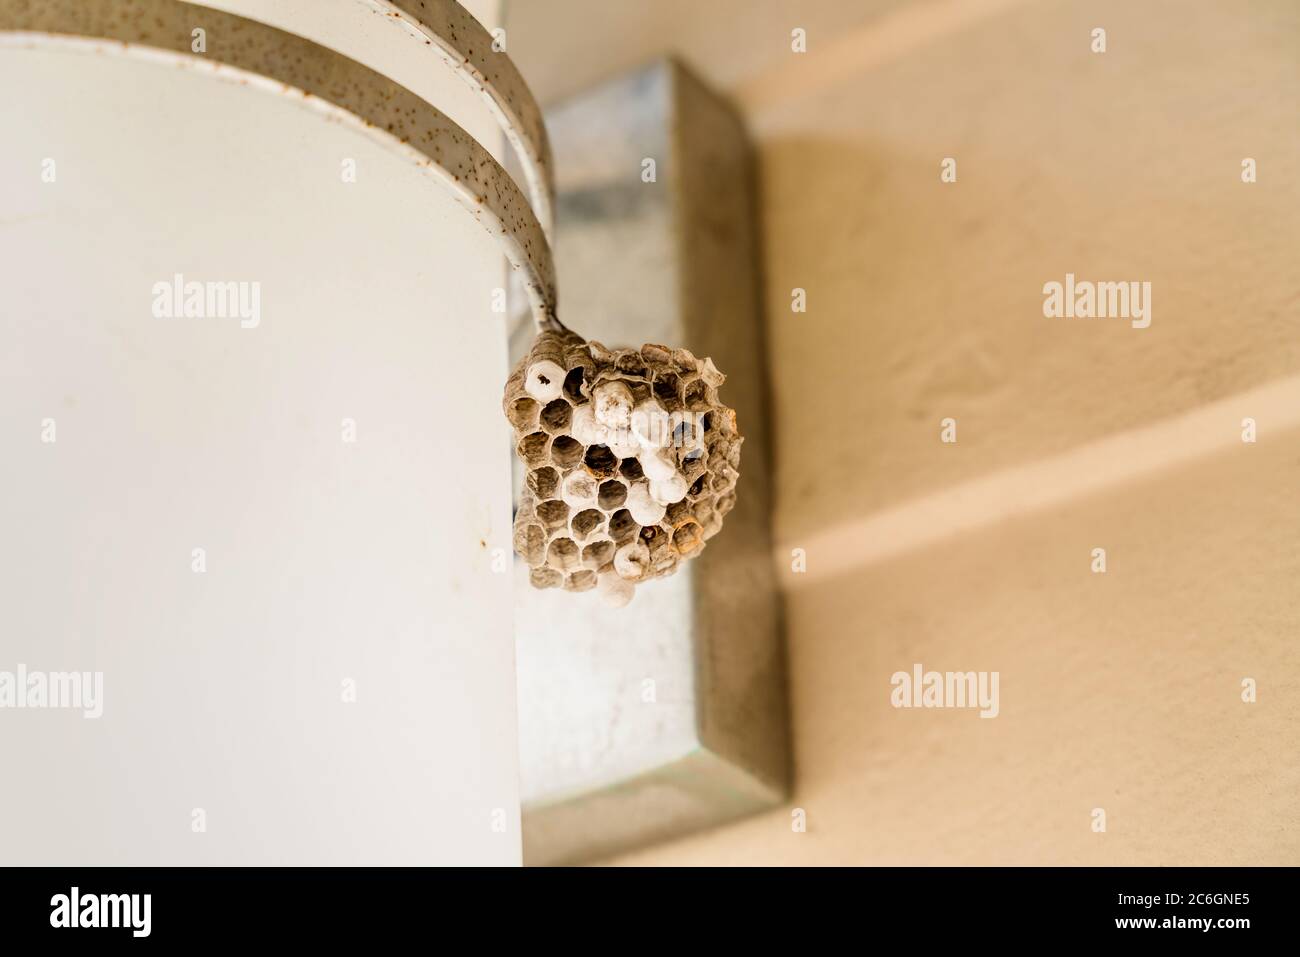 Empty wasp nest by outdoor lamp Stock Photo